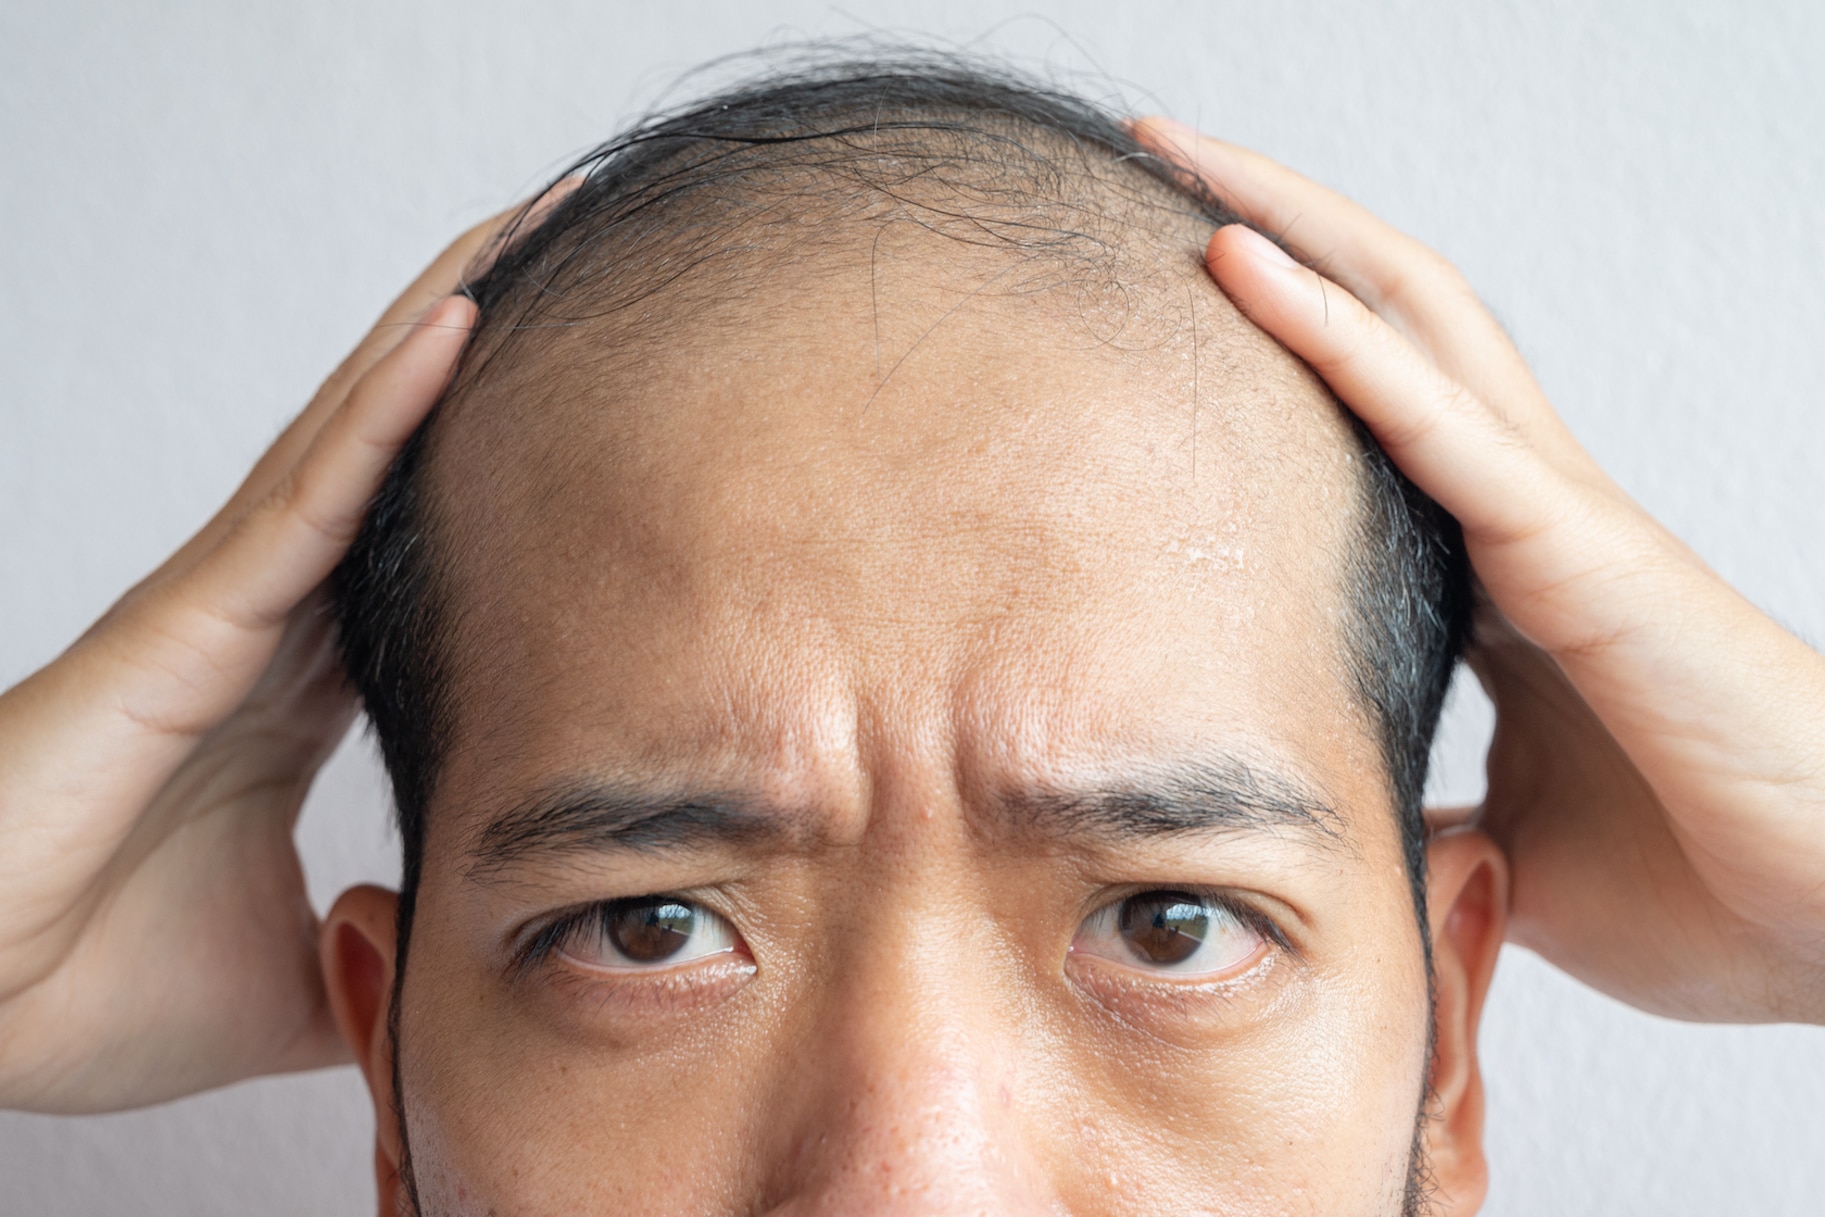 New hair loss treatment designed by artificial intelligence | SYFY WIRE